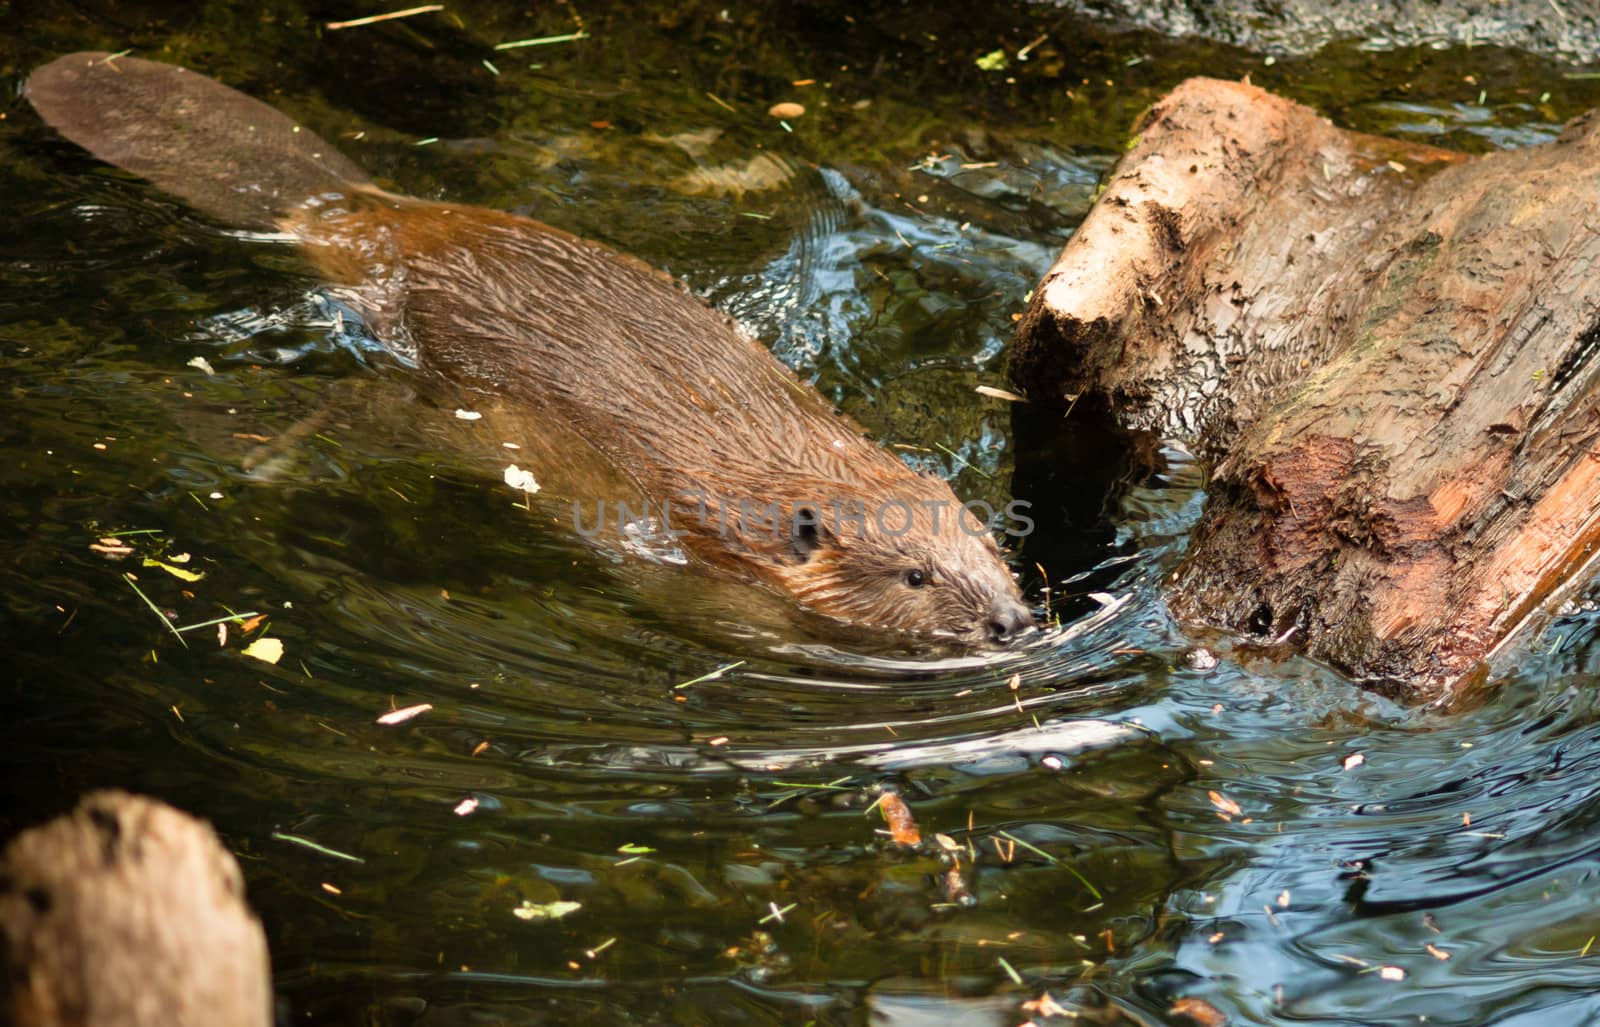 North American Beaver Castor Canadensis Wild Animal Swimming Dam by ChrisBoswell